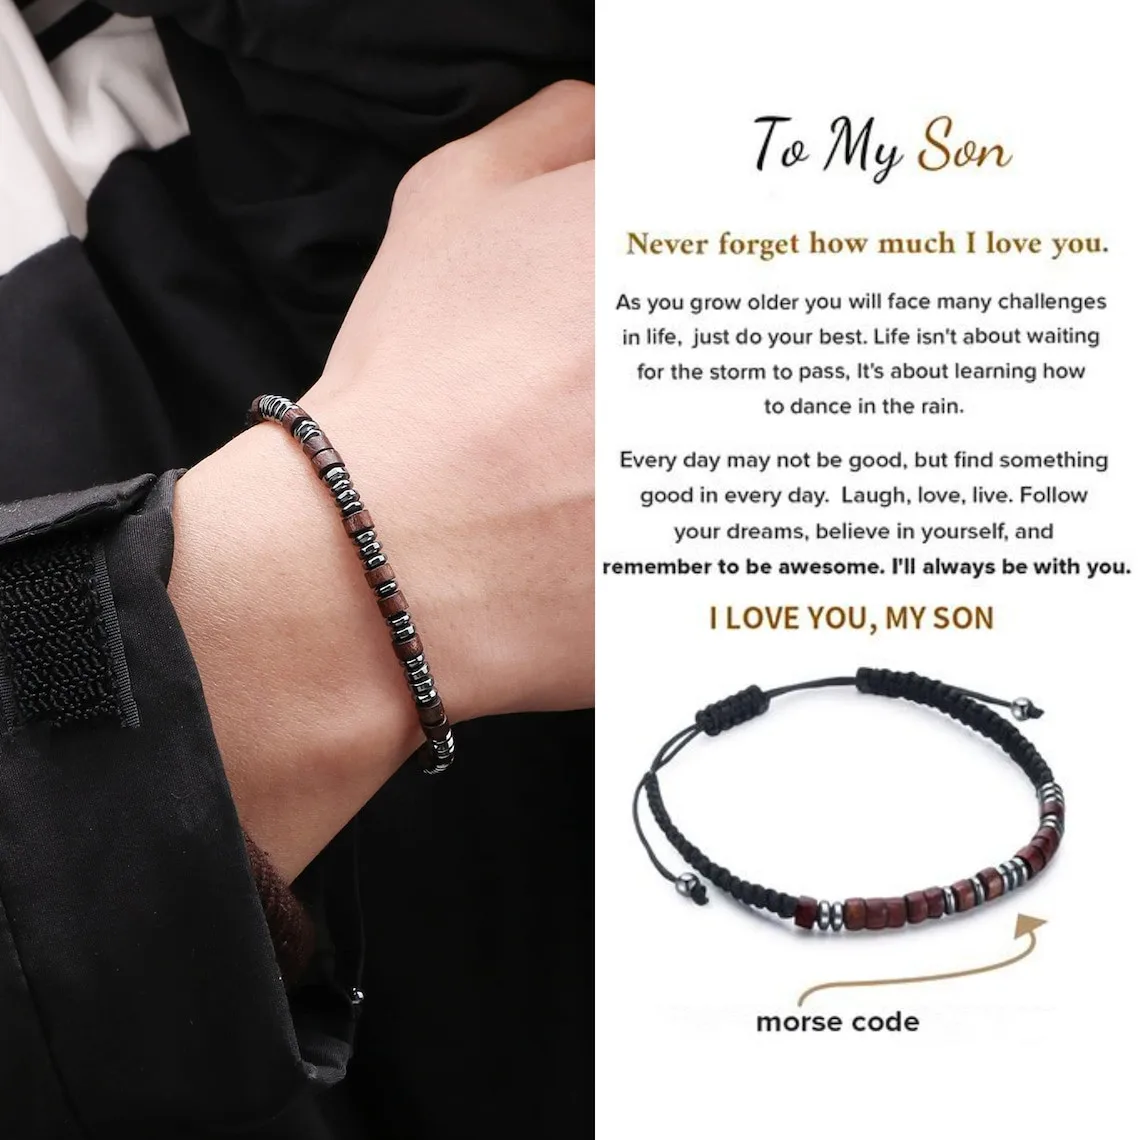 To My Son I Love You Morse Code Bracelet With Card Adjustable Message Bracelets Son Gift from Mom Dad Birthday Chrismas Gift